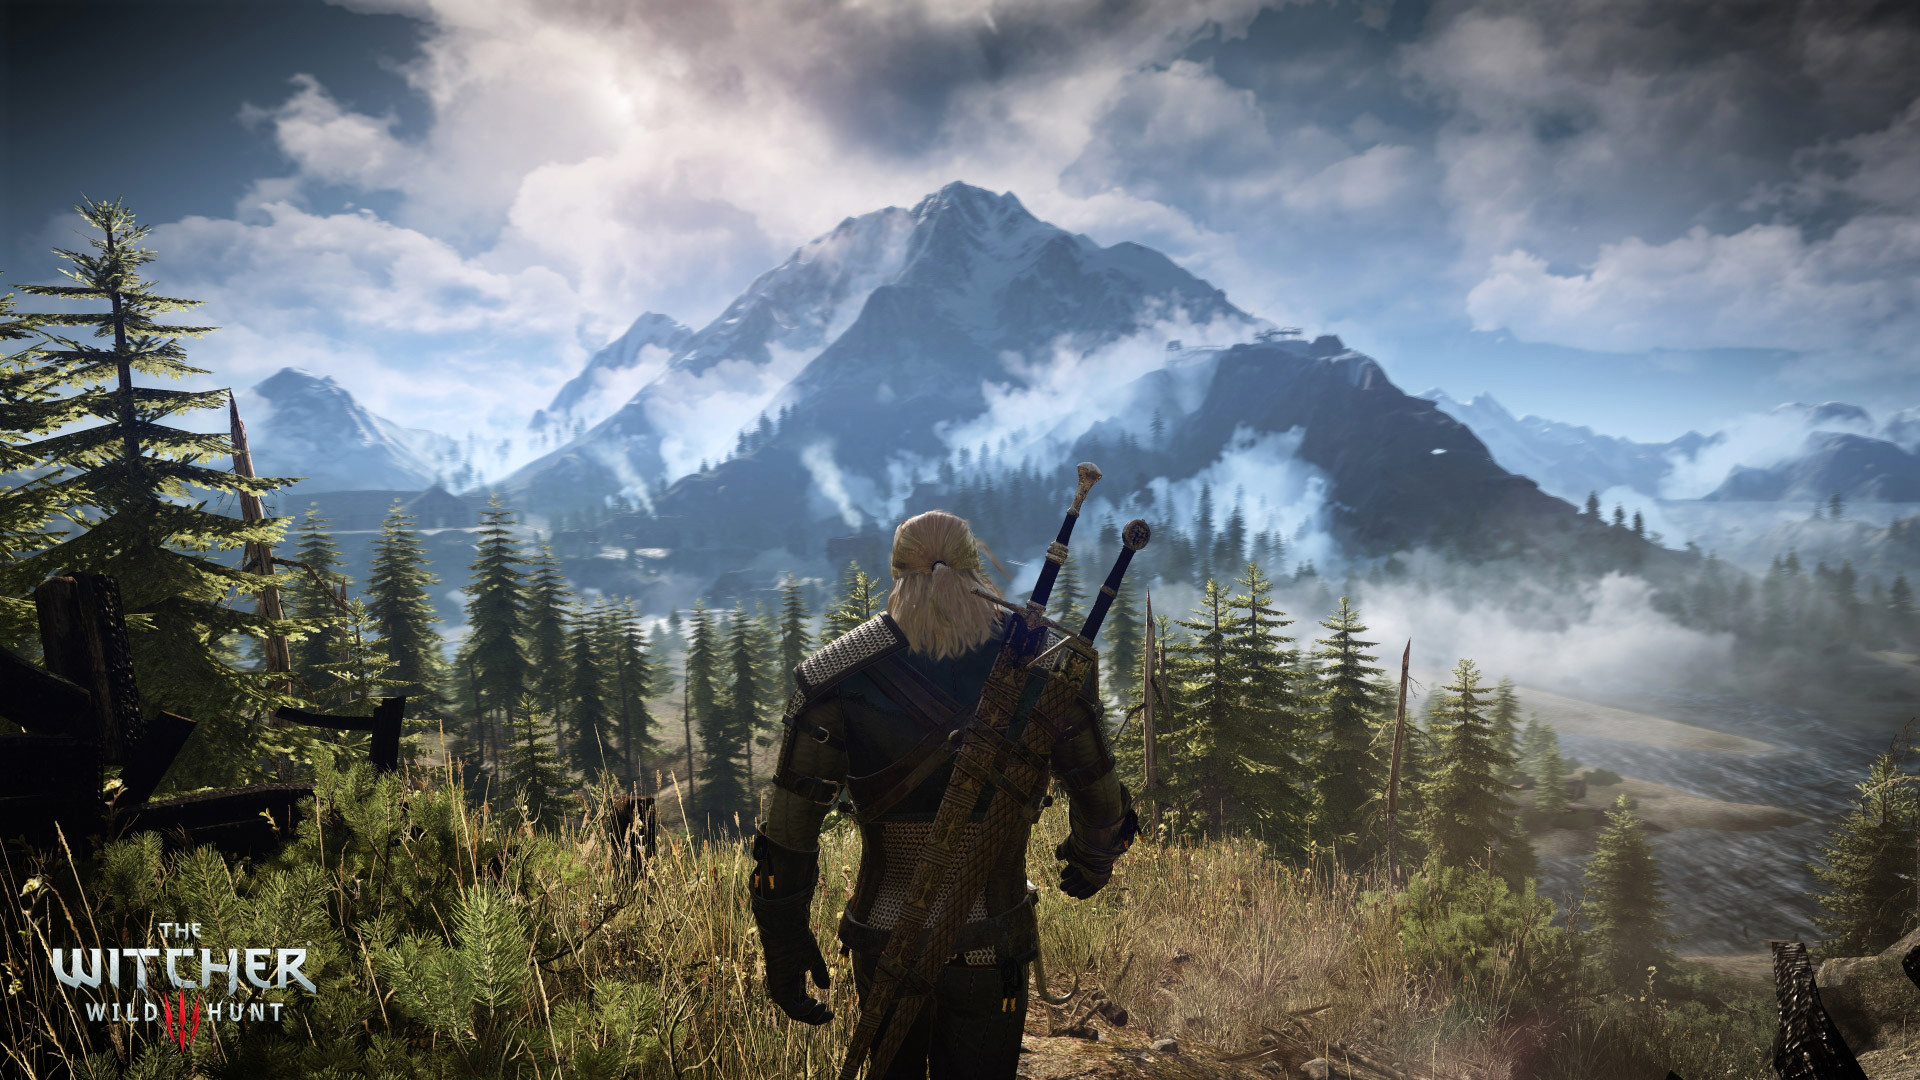 1920x1080 The Witcher 3 Wallpaper 47274